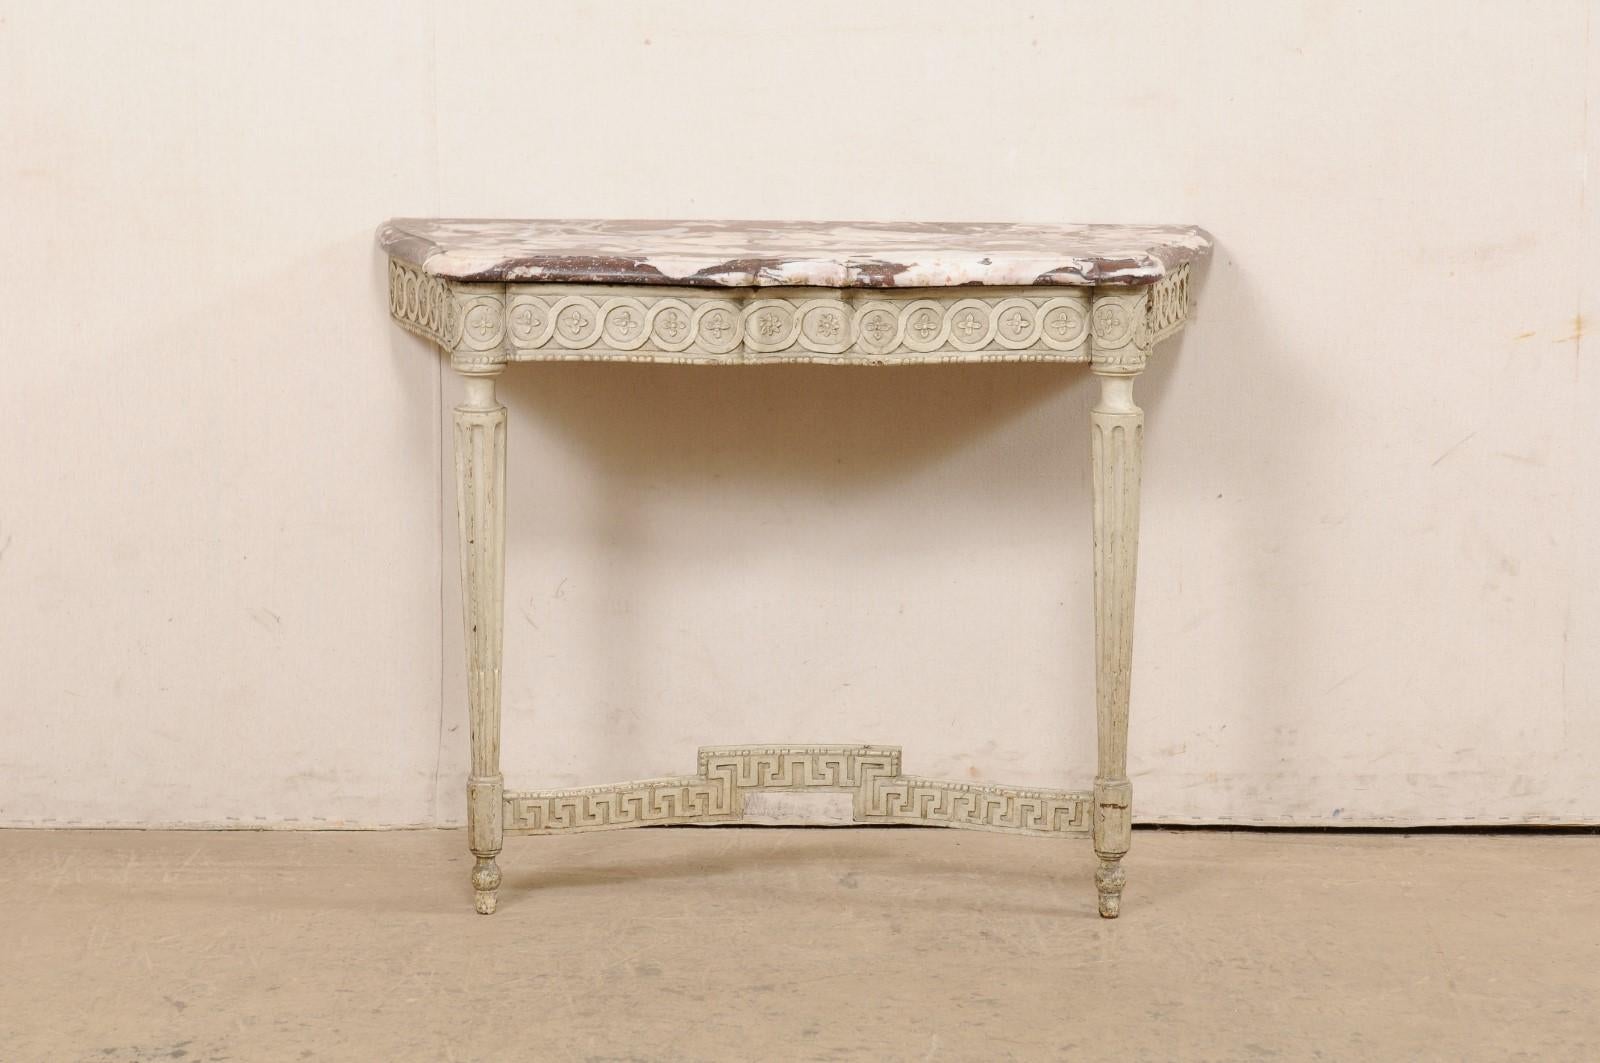 A French wall console, with its original marble top, from the 18th century. This antique table from France is beautifully curvaceous with an accolade style serpentine-shaped front and shapely sides. The original marble rests upon an apron